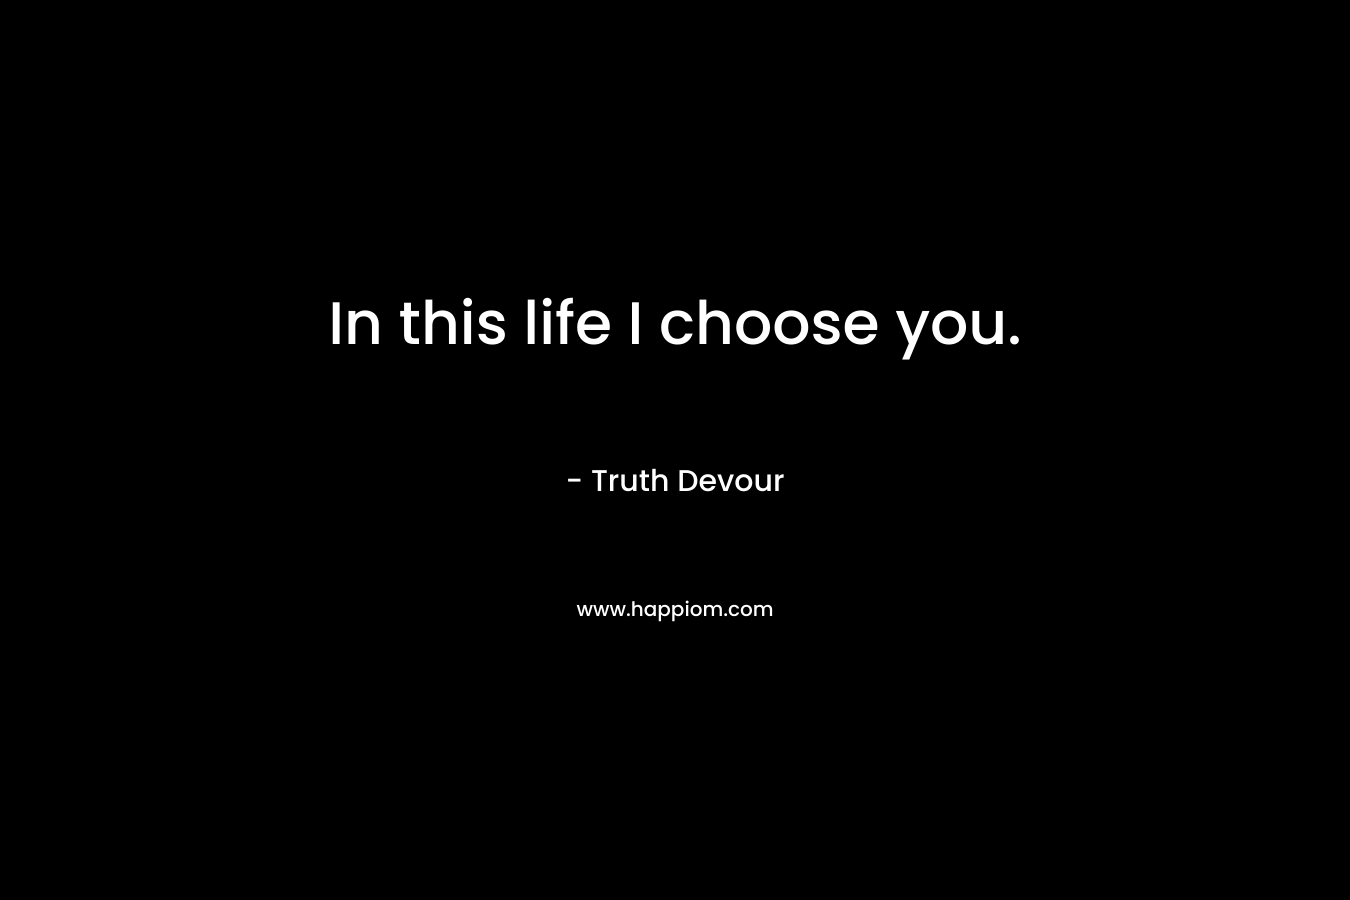 In this life I choose you.